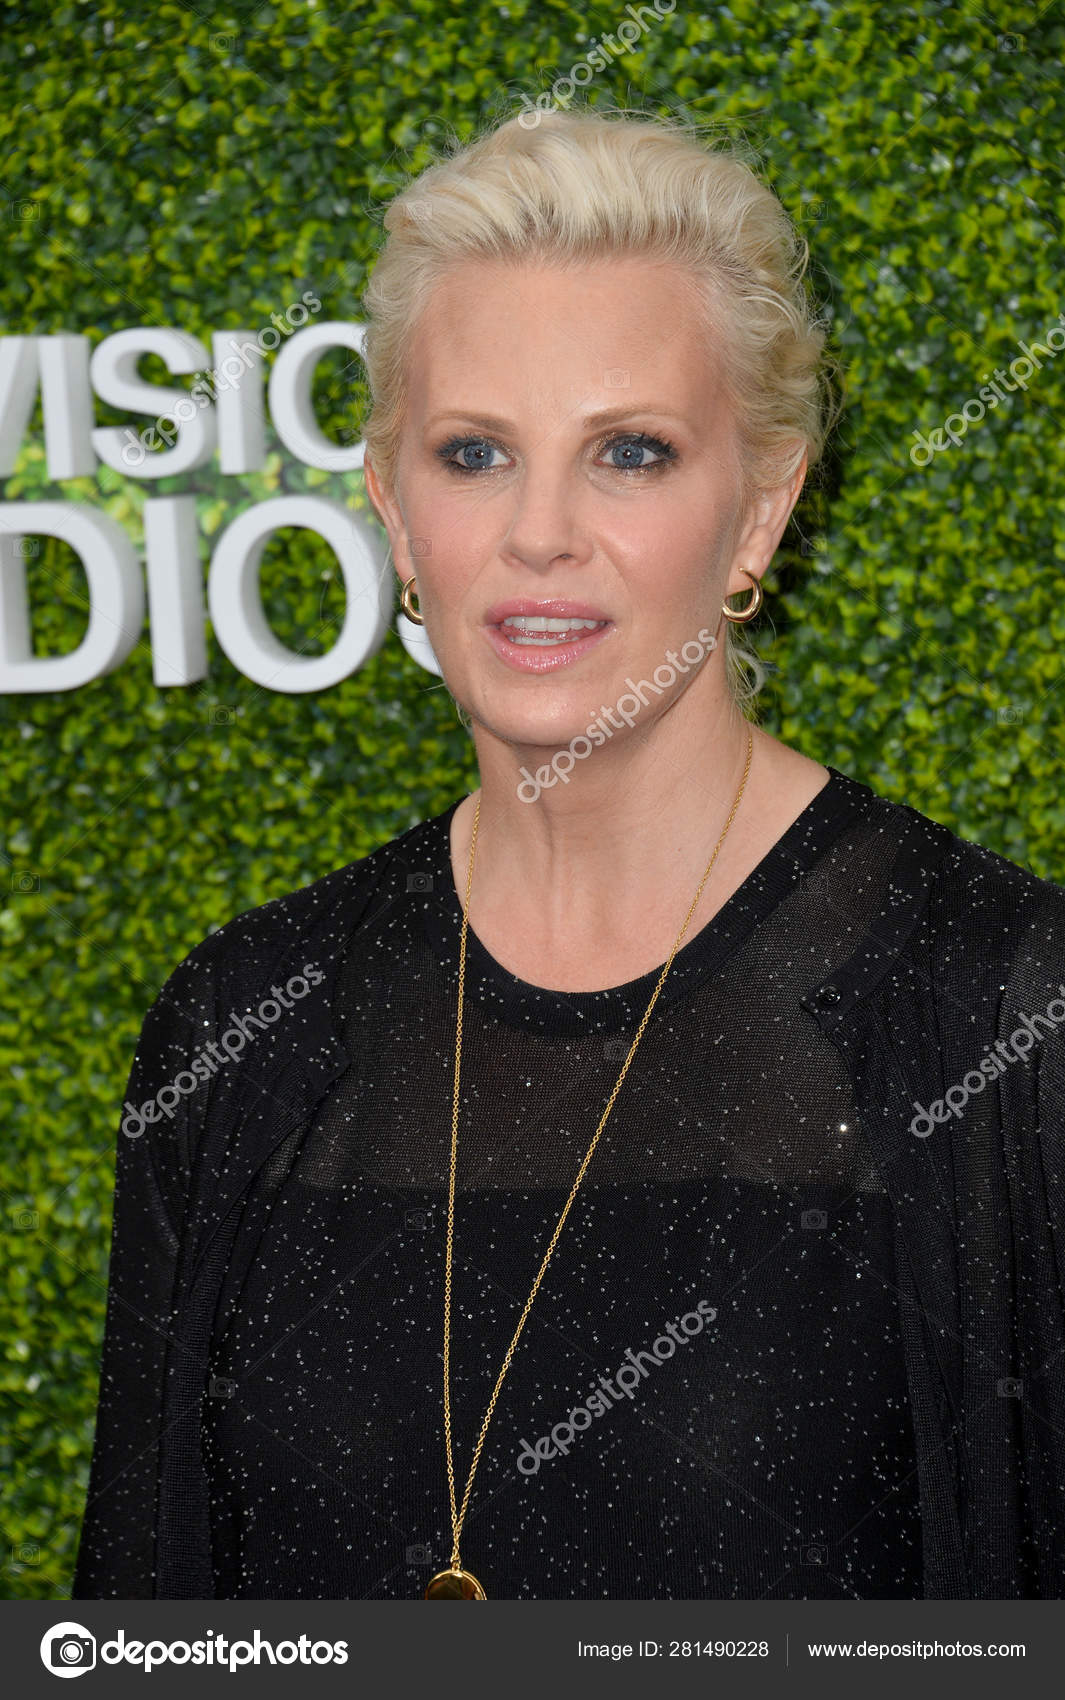 Pictures of monica potter